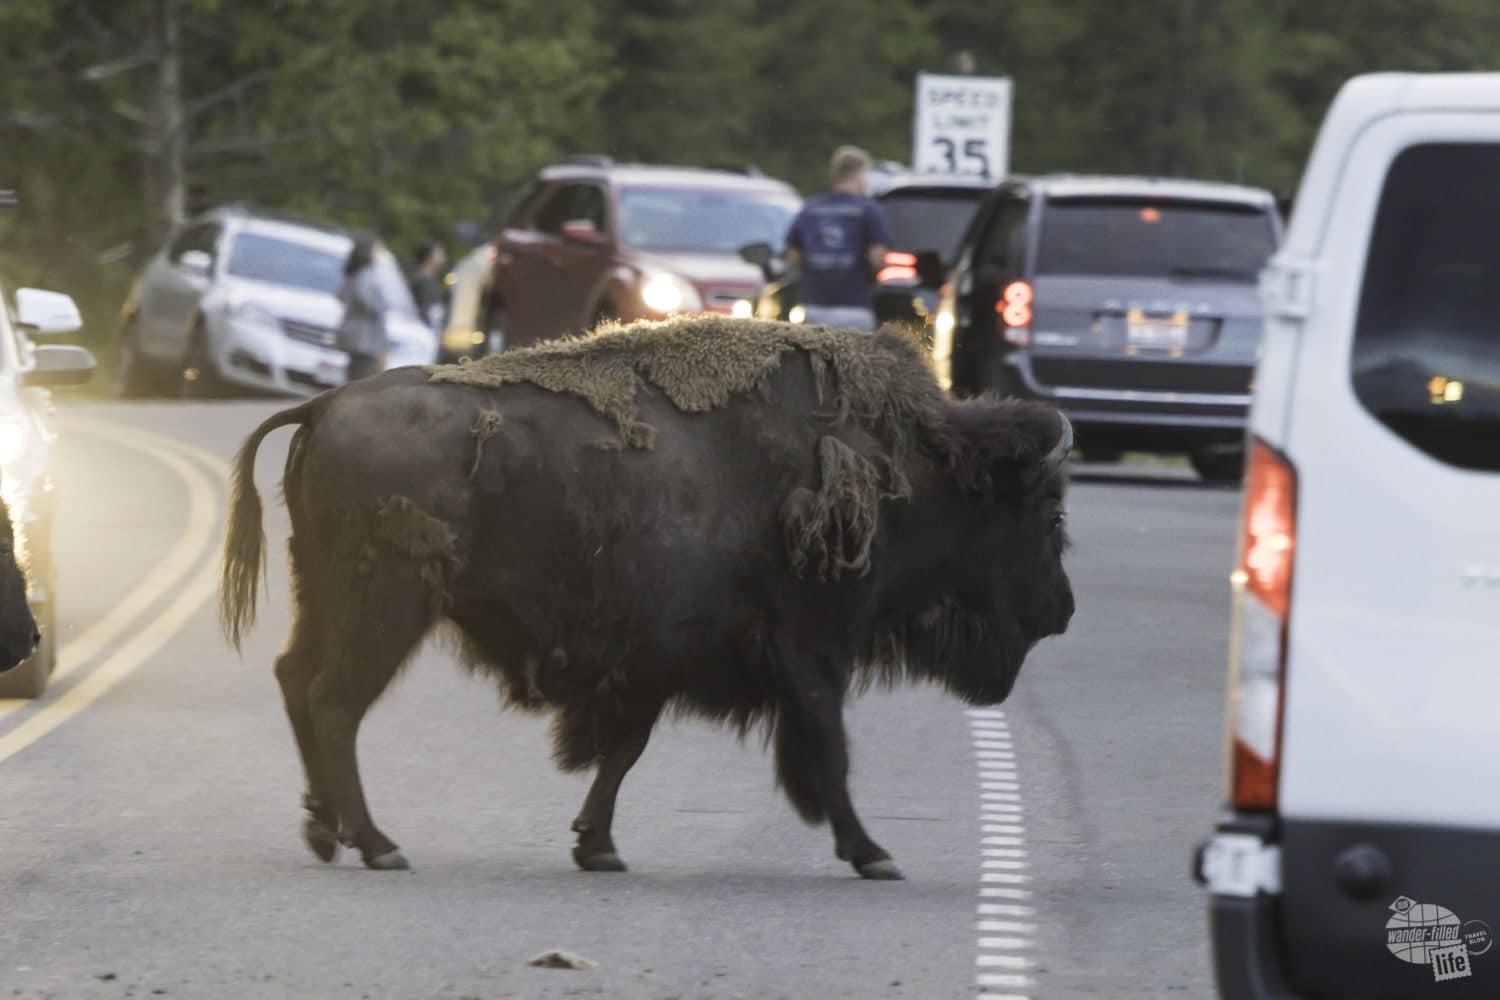 You will encounter wildlife on the road in Yellowstone.